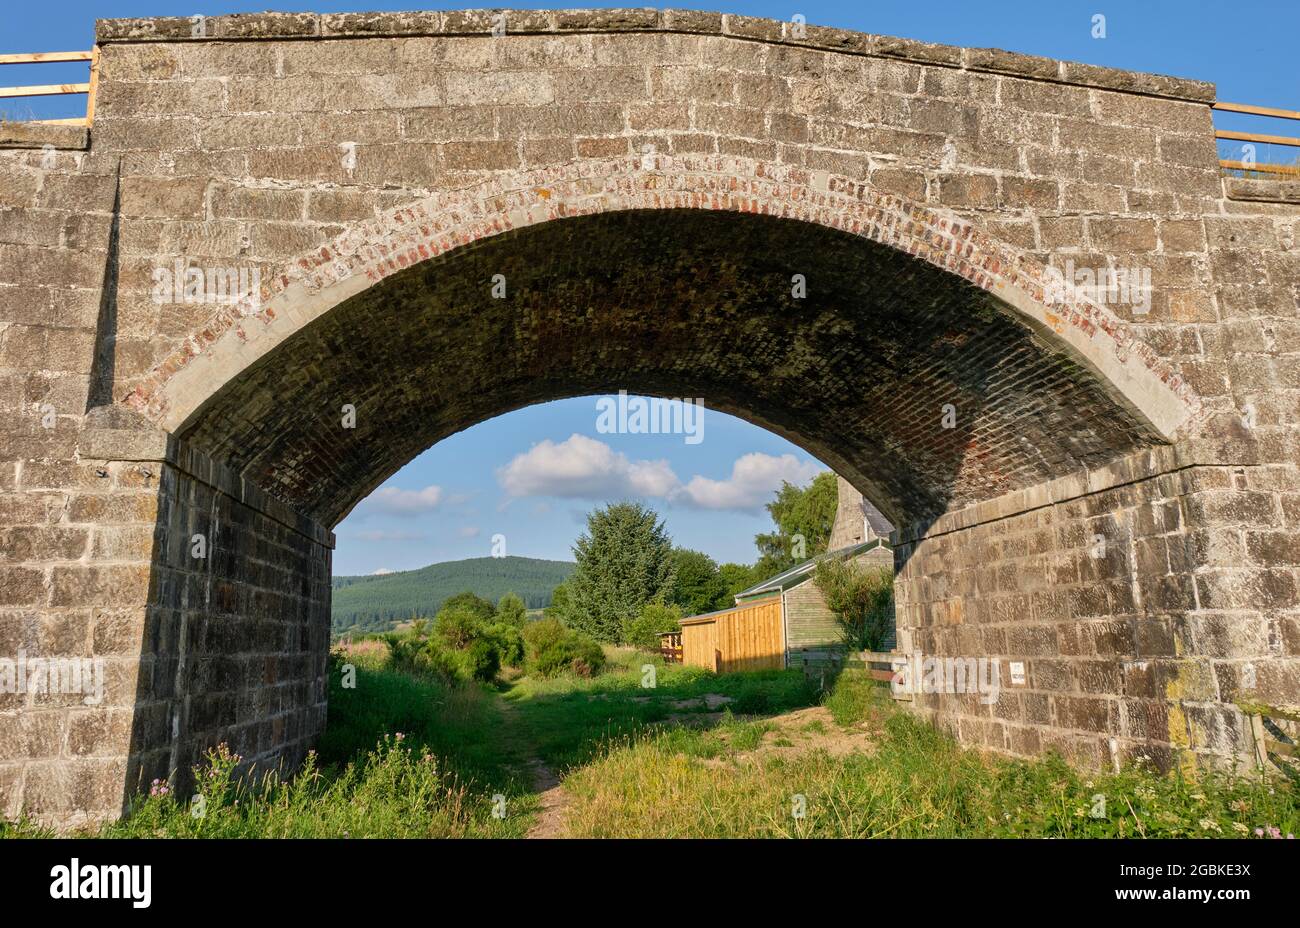 Bridge over the old Great North of Scotland railway line between Boat of Garten and Craigellachie, at Cromdale, near Grantown-on-Spey, Speyside, Scotl Stock Photo